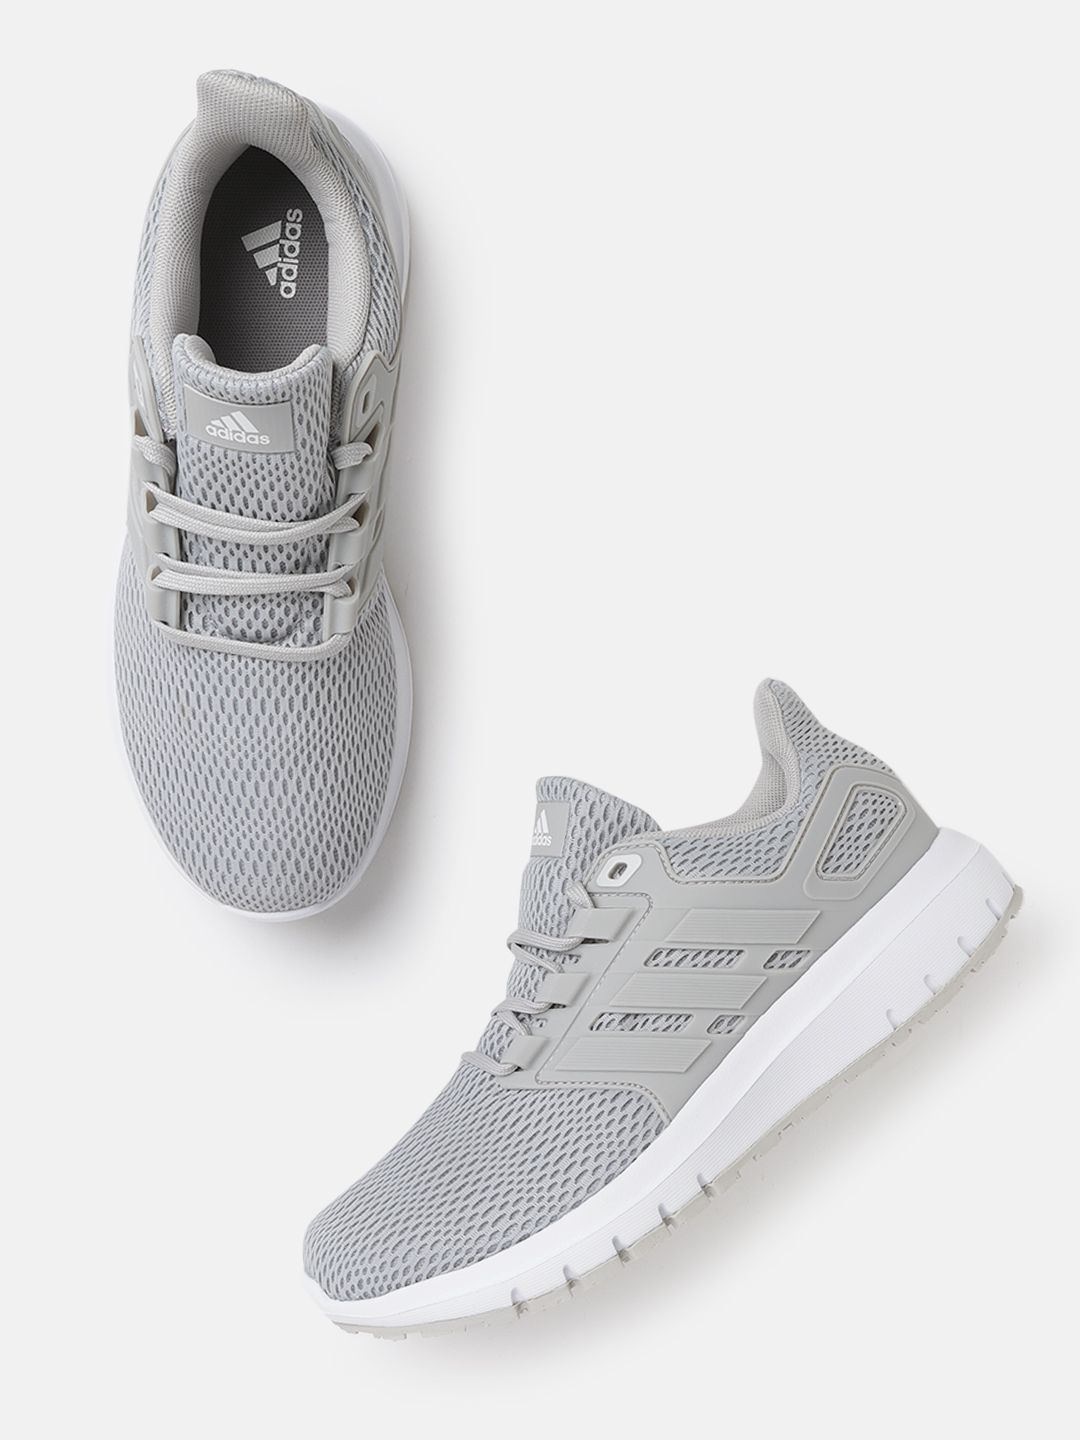 ADIDAS Women Grey Woven Design Ultimashow Running Shoes Price in India